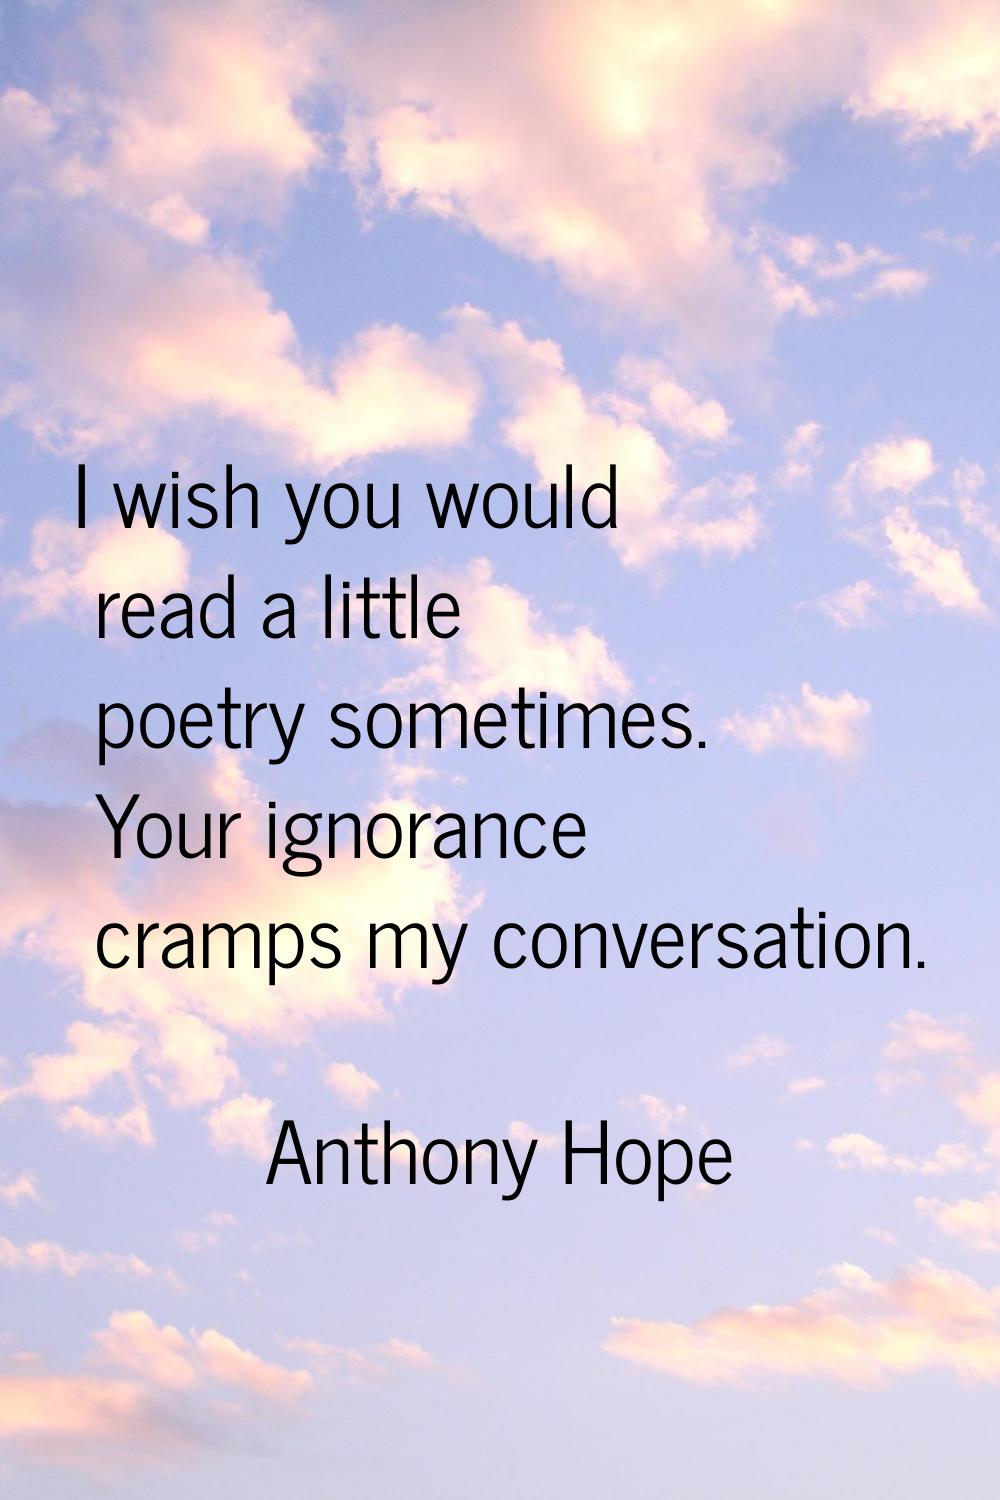 I wish you would read a little poetry sometimes. Your ignorance cramps my conversation.